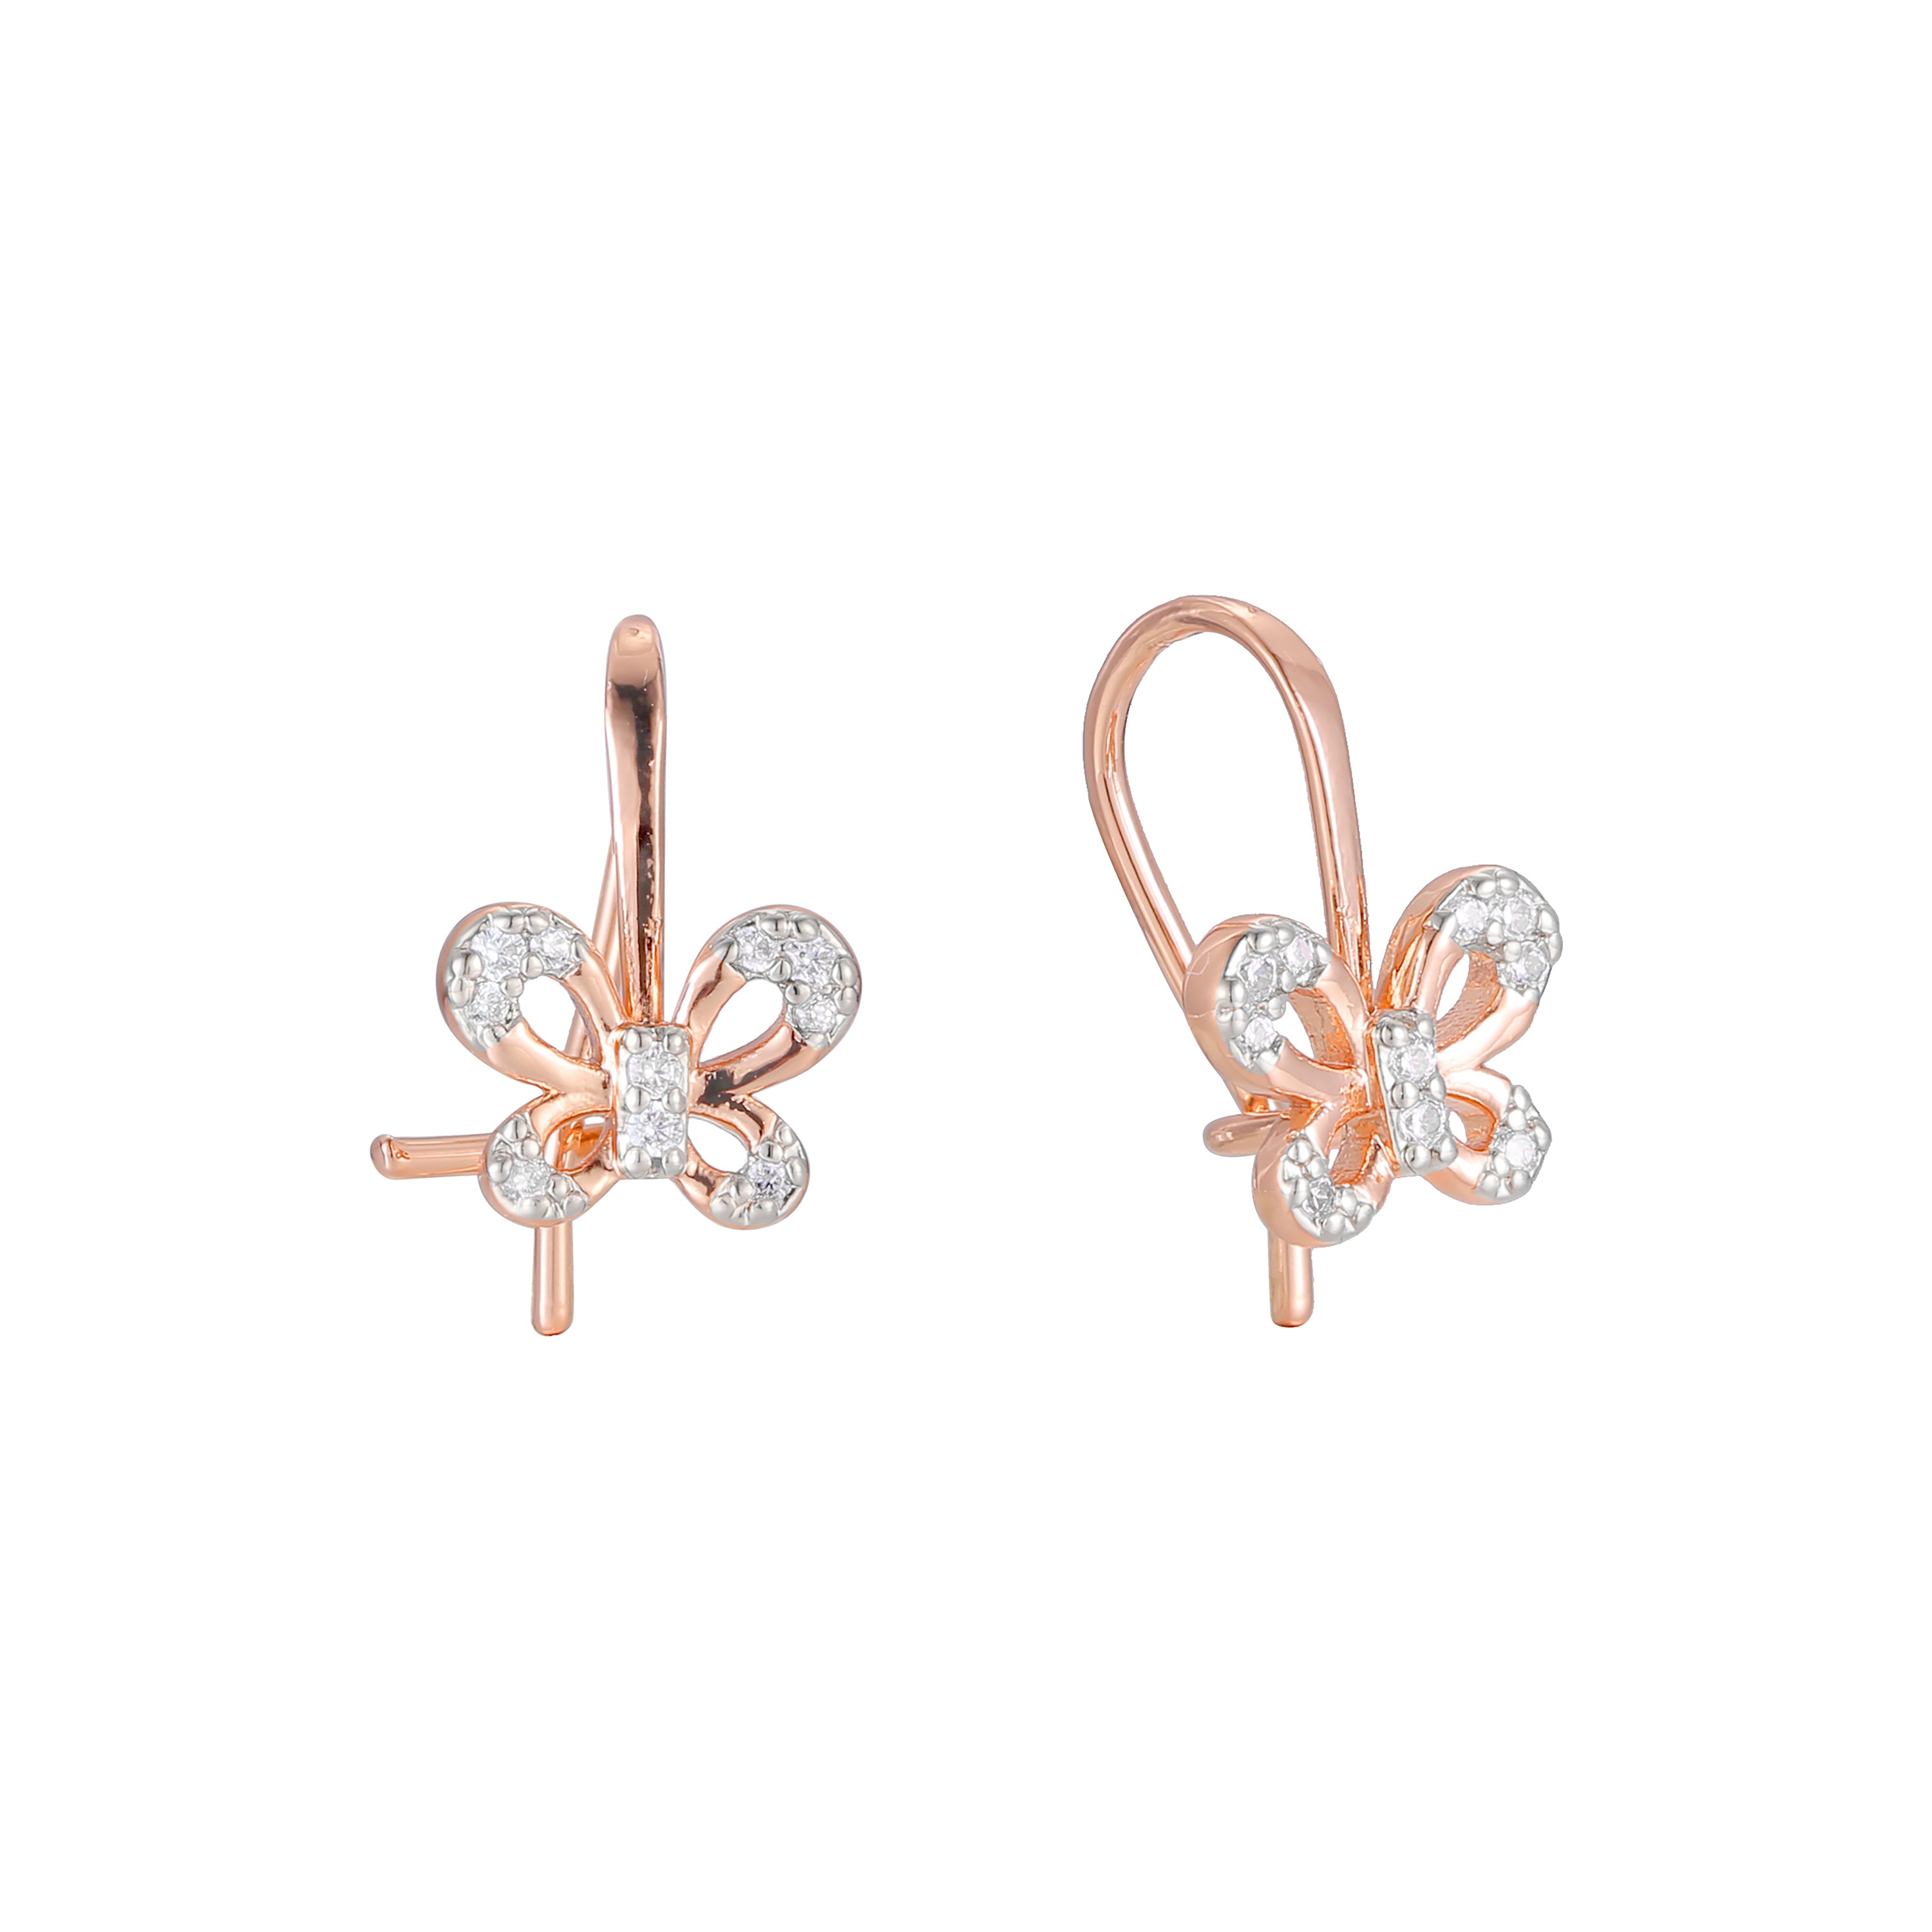 Butterfly wire hook child earrings in 14K Gold, Rose Gold plating colors